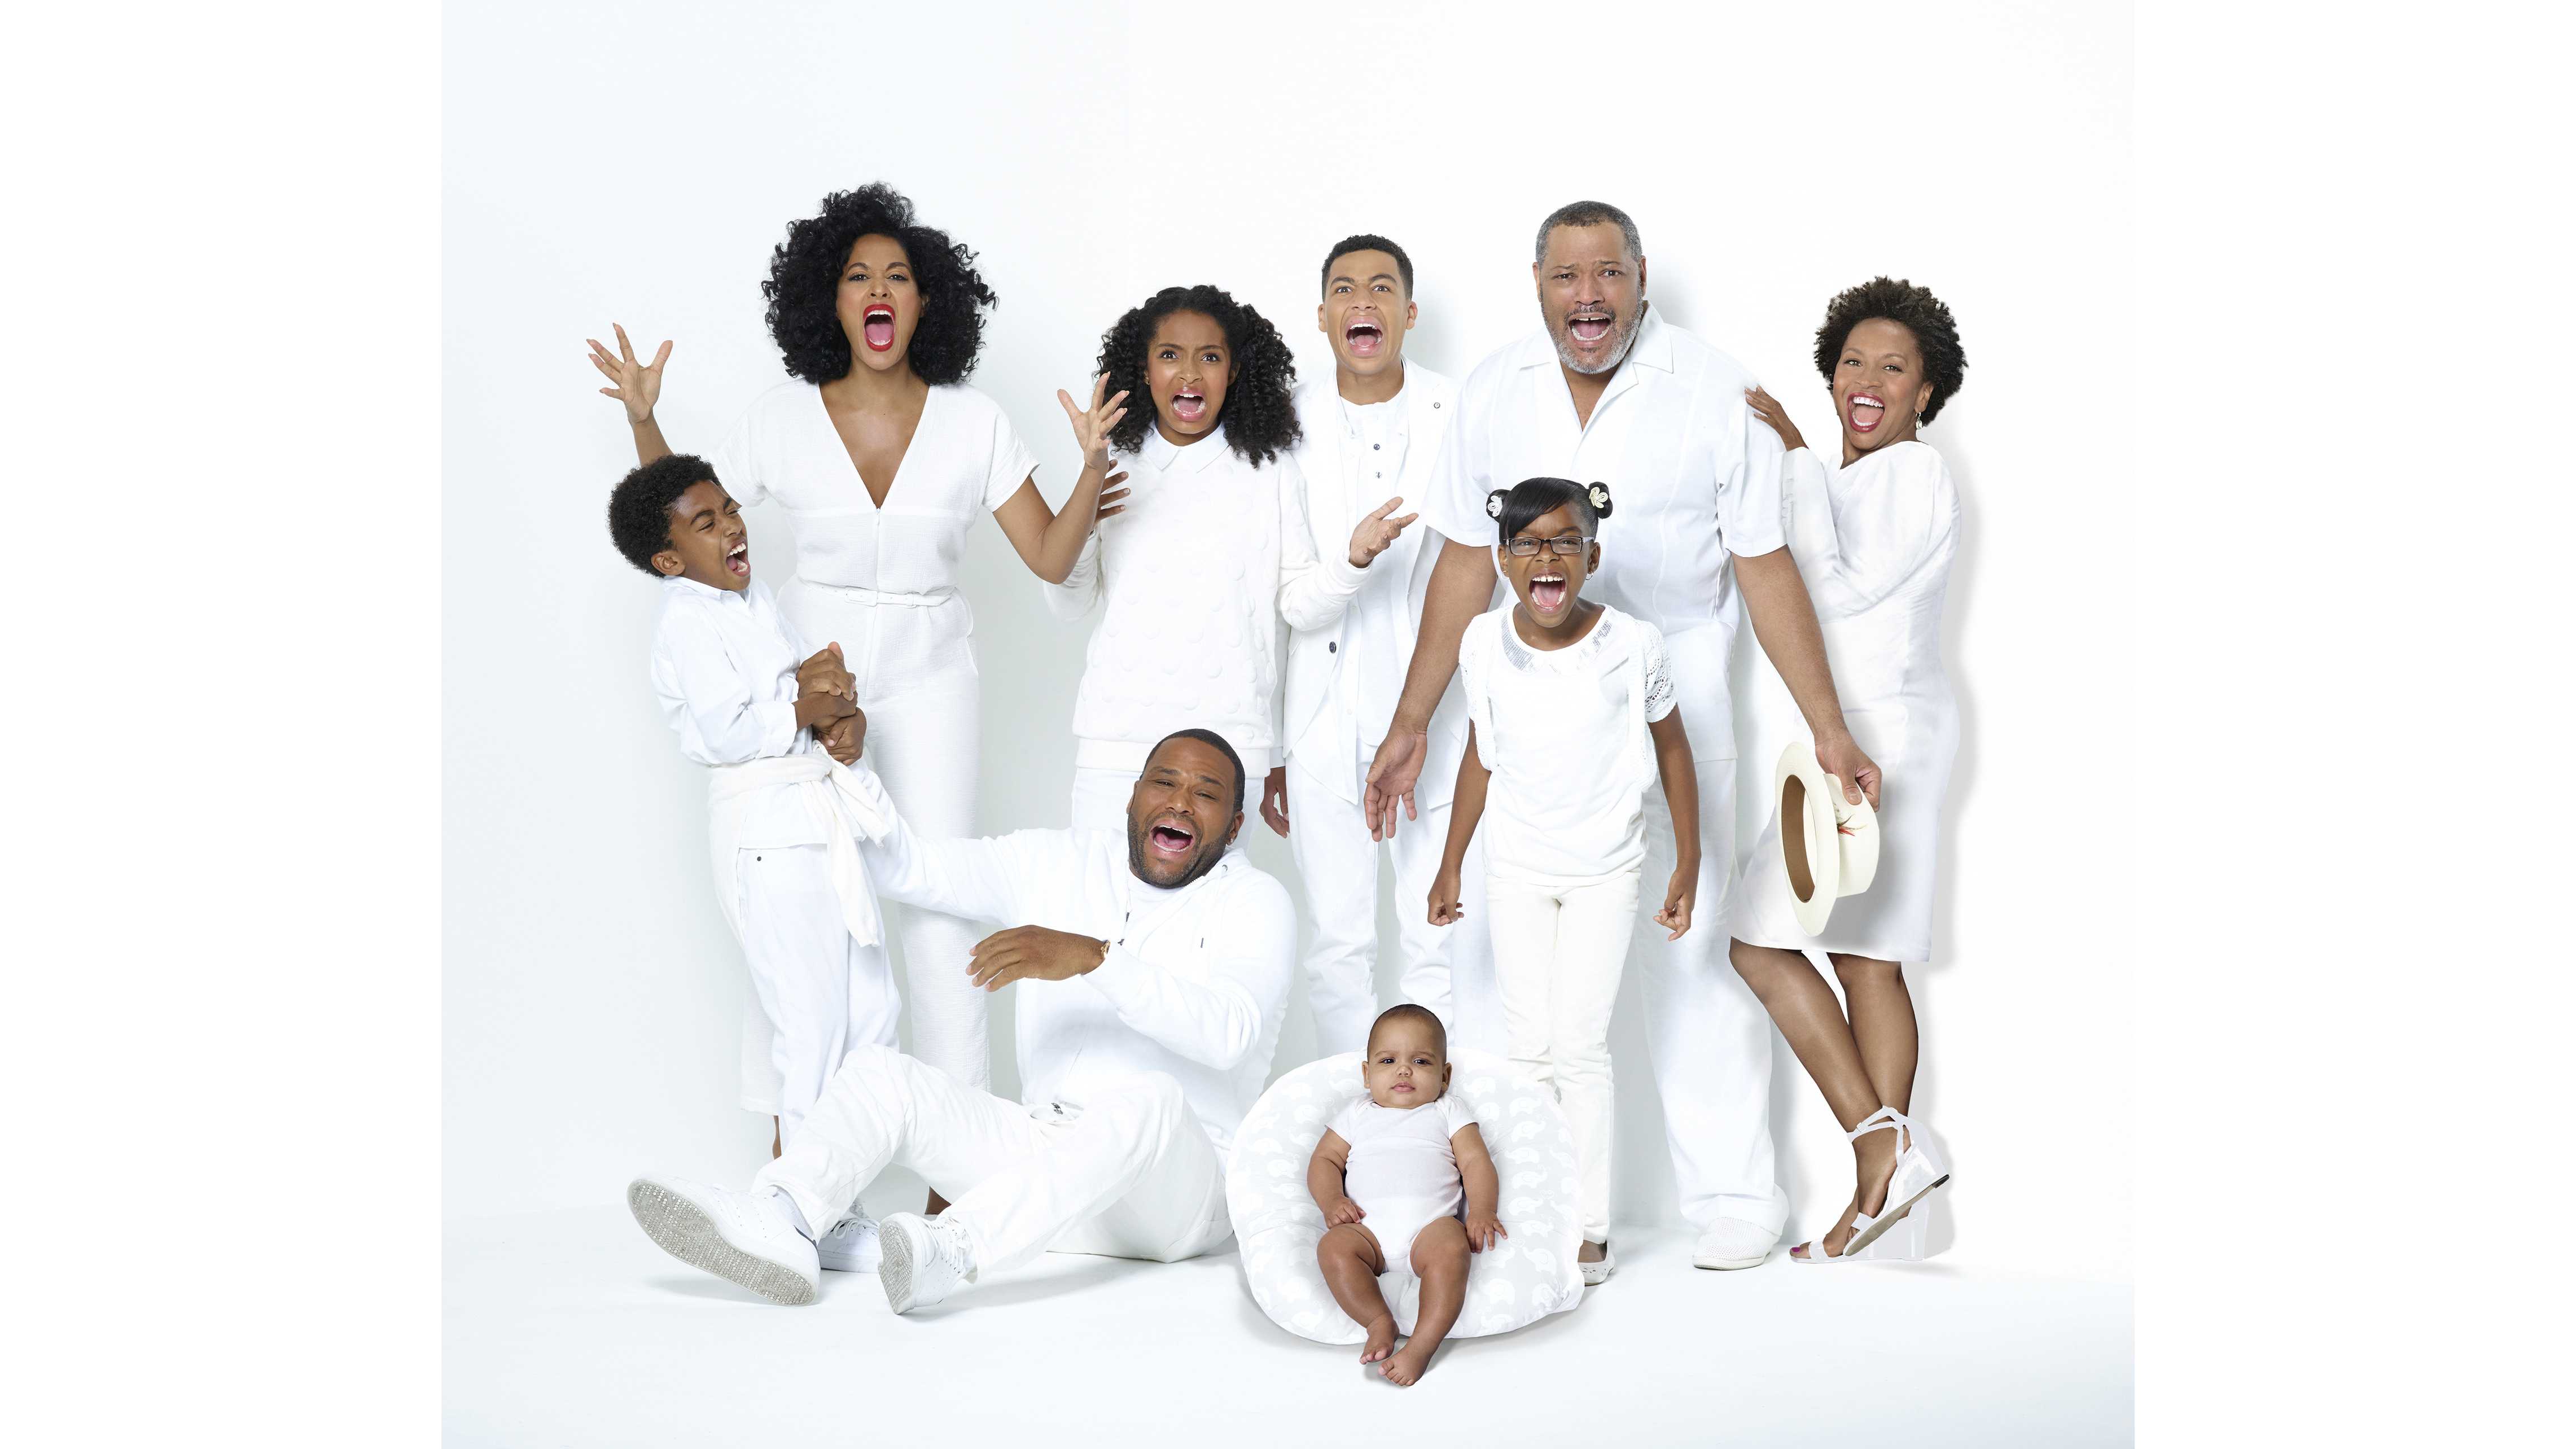 Miles Brown as Jack Johnson, Tracee Ellis Ross as Rainbow Johnson, Yara Shahidi as Zoey Johnson, Anthony Anderson as Andre "Dre" Johnson, Marcus Scribner as Andre Johnson, Jr., Austin and Berlin Gross as Devonte Johnson, Marsai Martin as Diane Johnson, Laurence Fishburne as Pops Johnson and Jenifer Lewis as Ruby Johnson star in ABC's "black-ish." (ABC/Bob D'Amico)